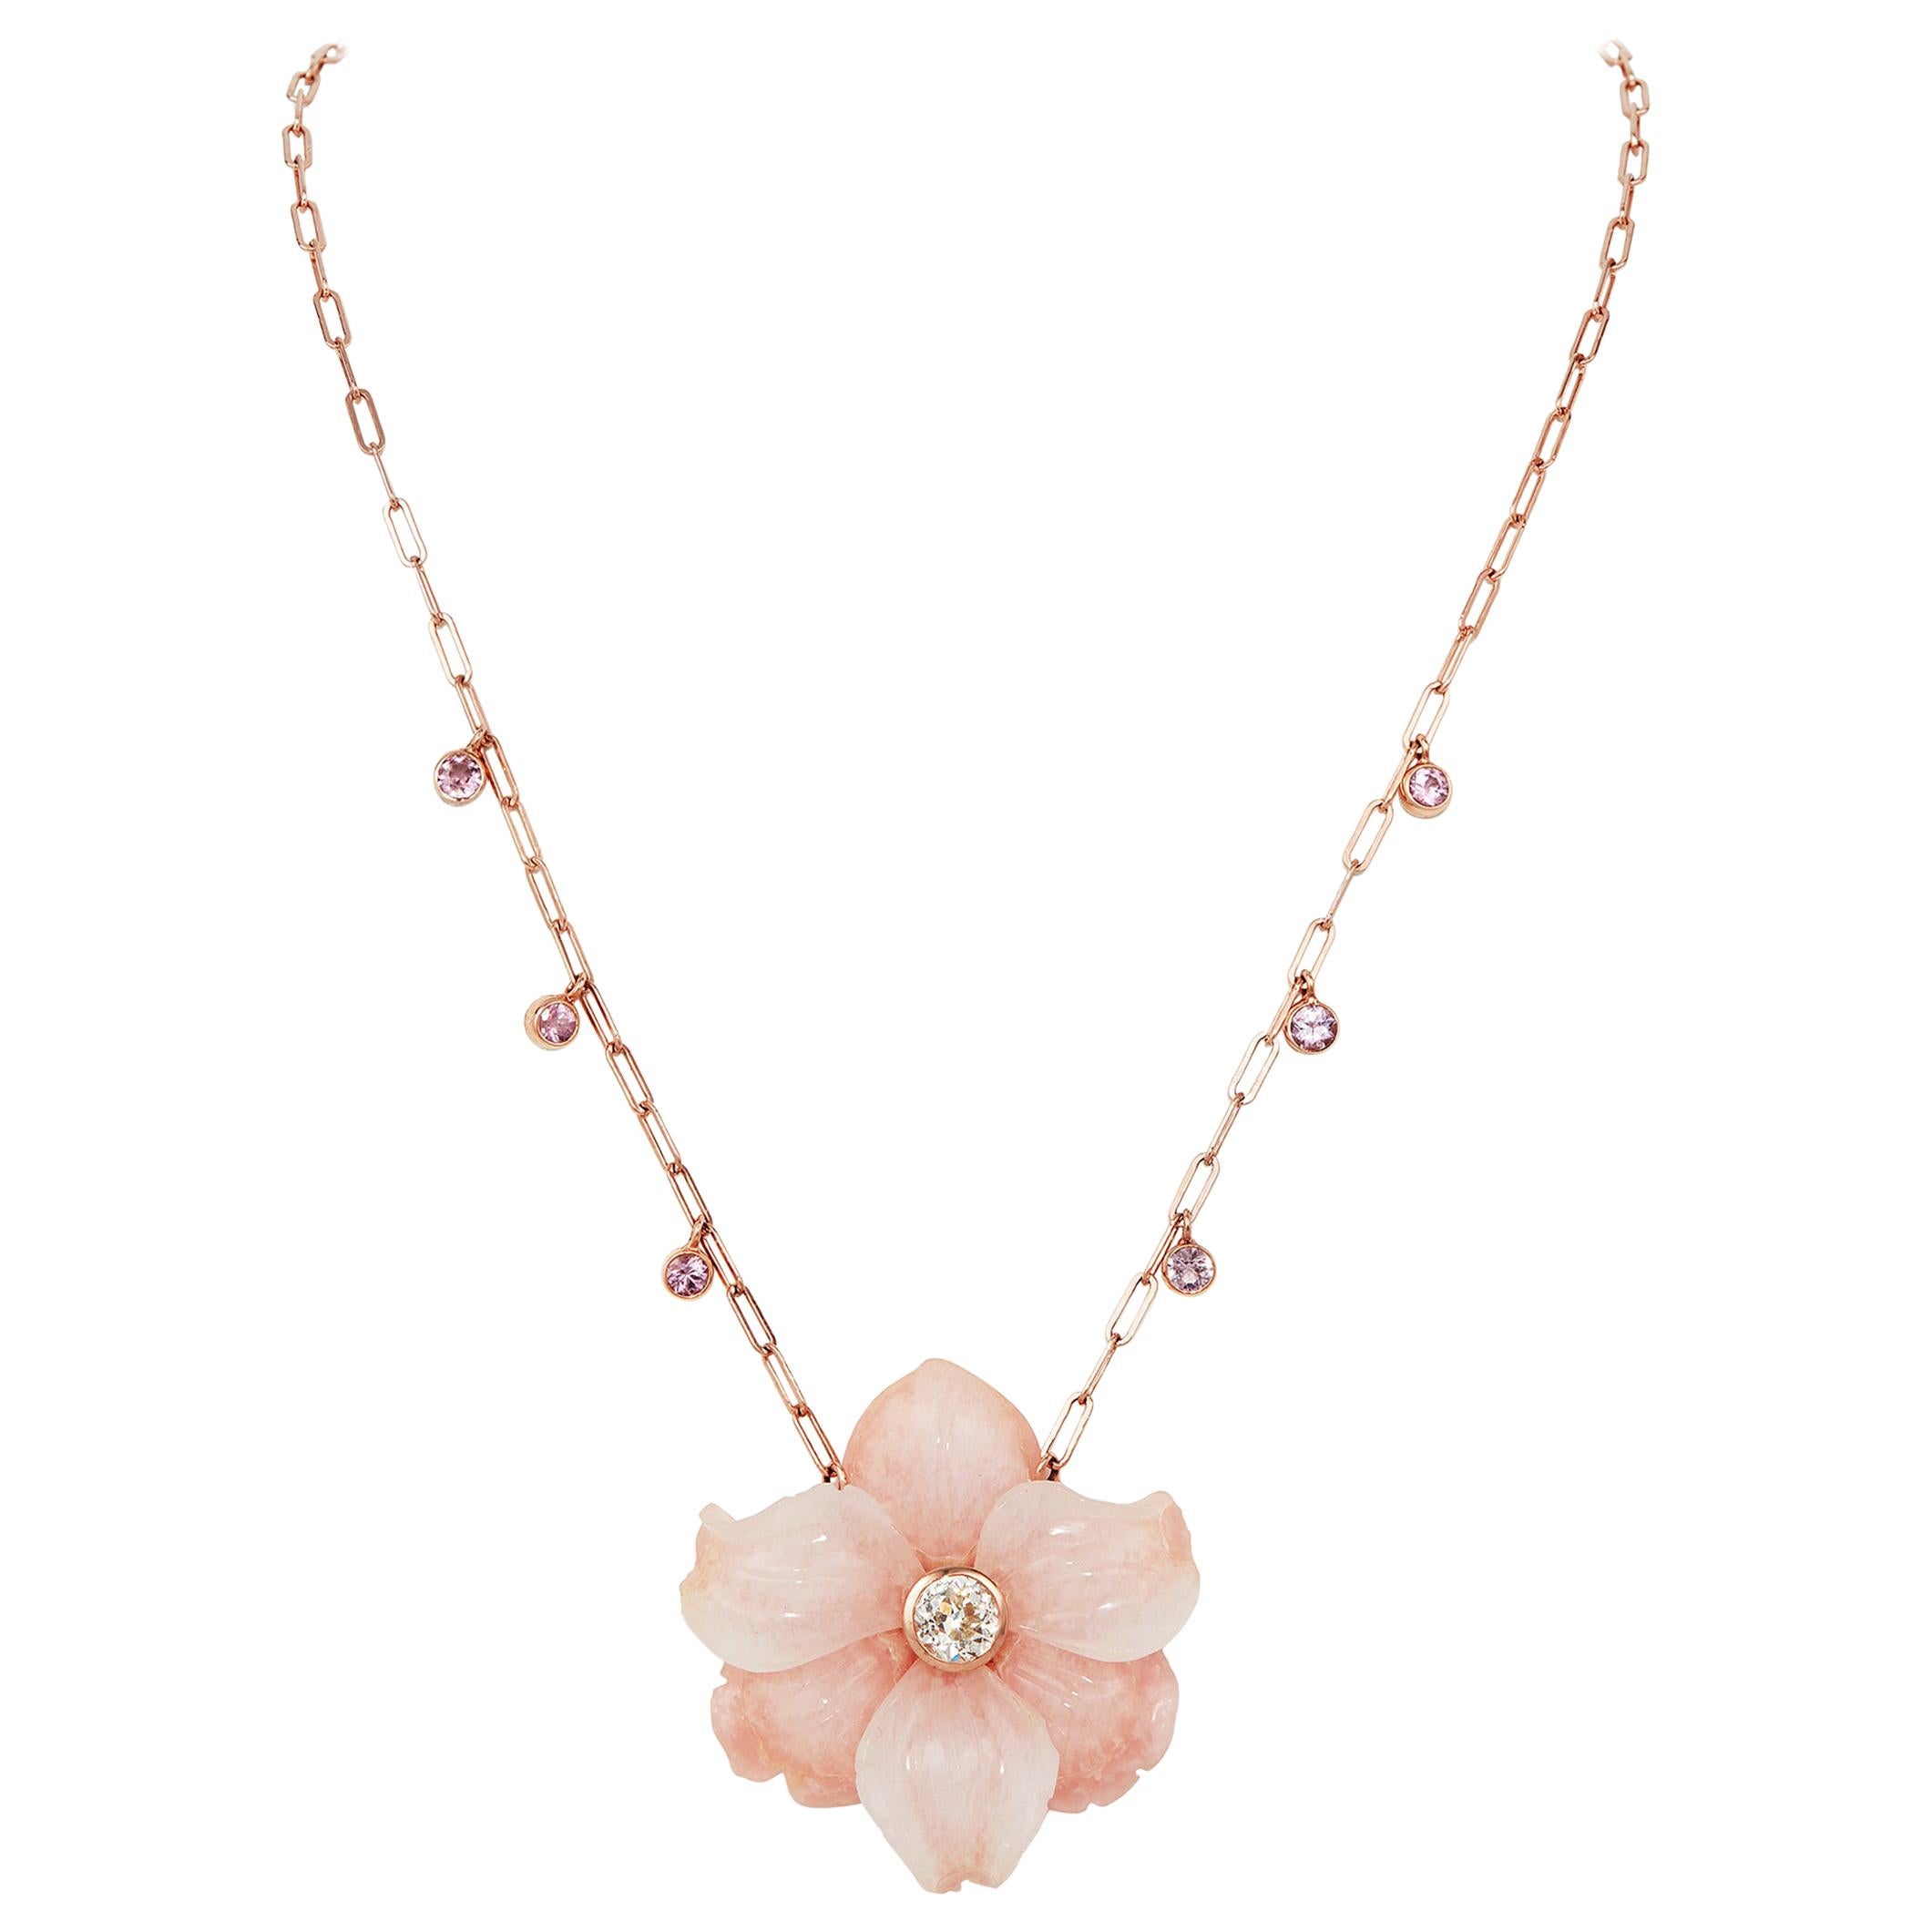 0.855 Carat Round Diamond, Carved Pink Calcite Flower Necklace with Pink Spinel 